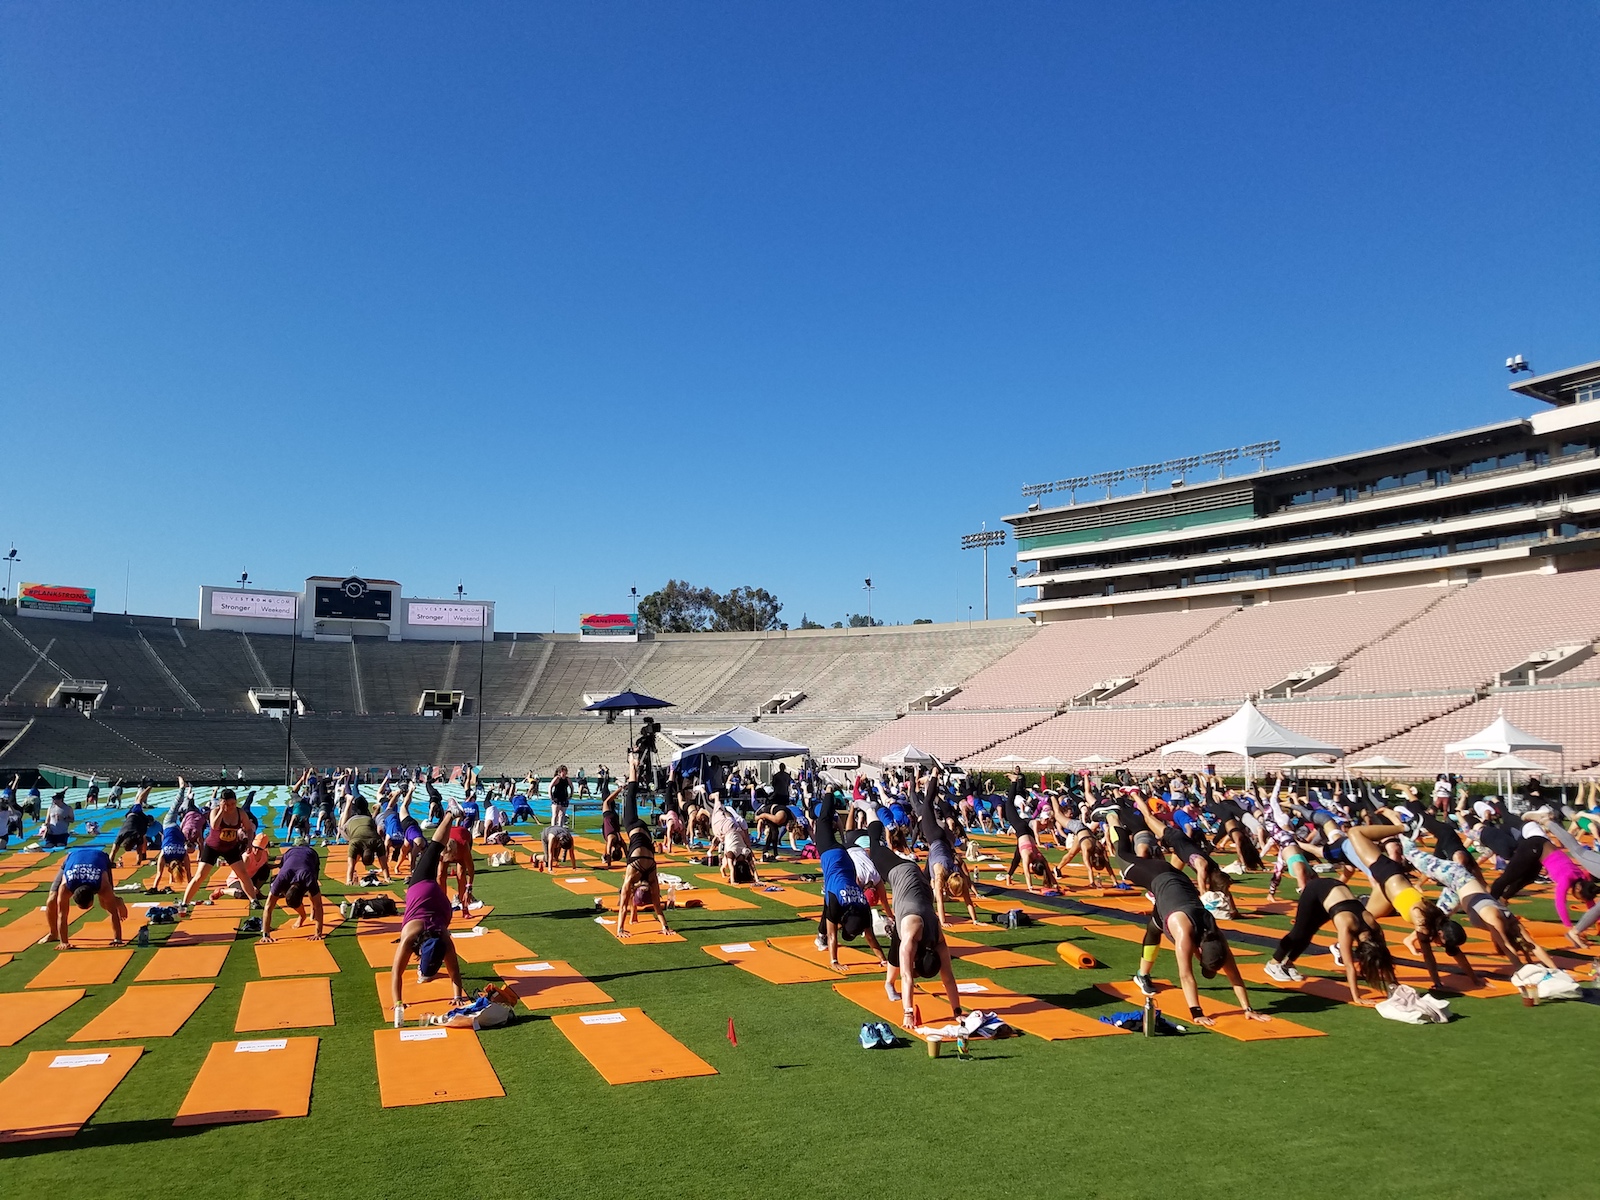 Last Saturday, it was my privilege and honor to lead yoga at the Stronger Weekend event at Rose Bowl Stadium. What an amazing experience full of amazing people!